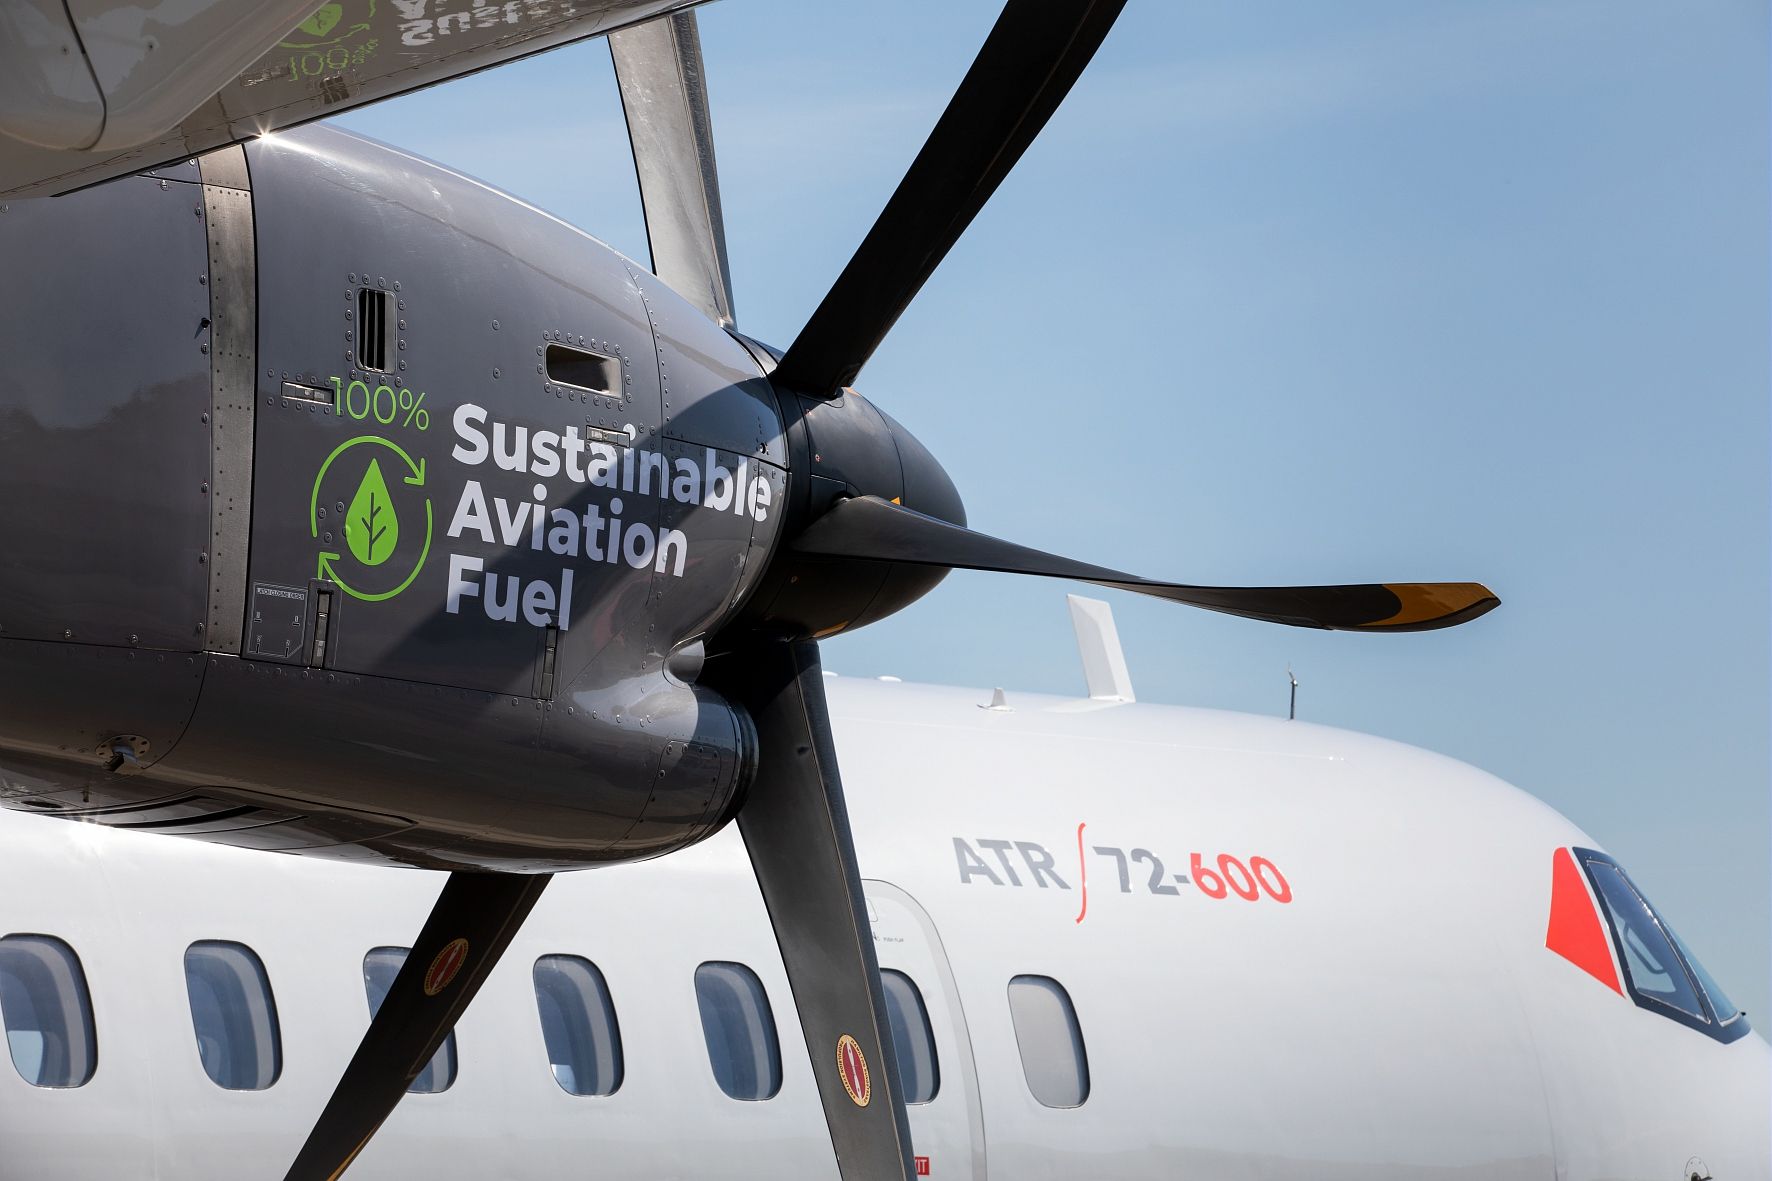 ATR aircraft with 100% sustainable aviation fuel logo on engine